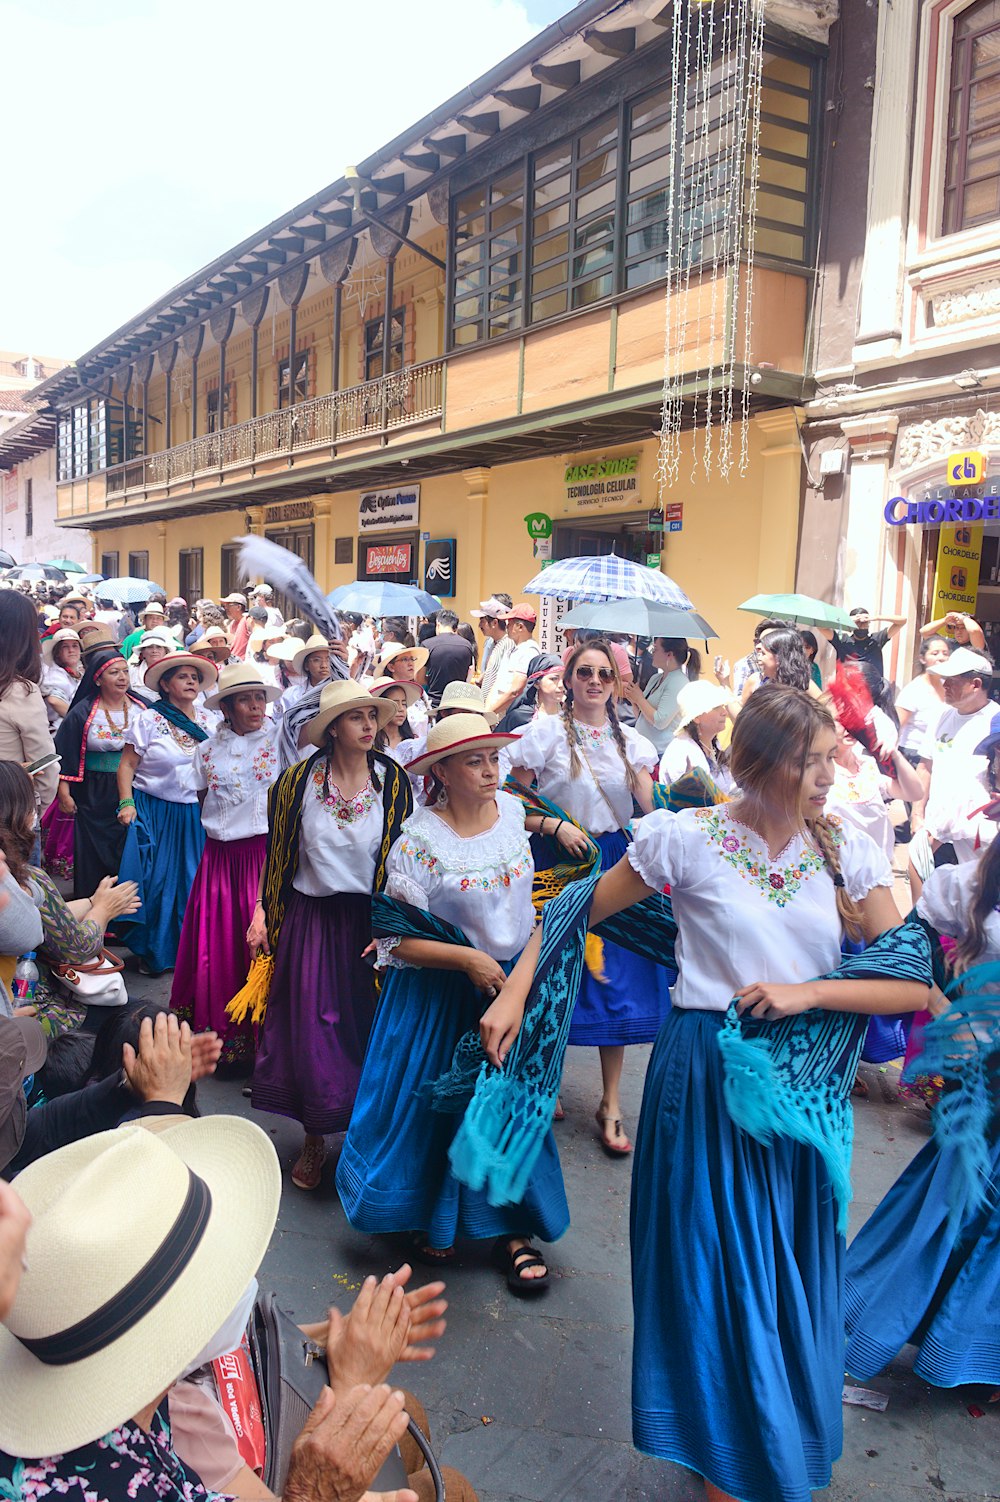 a group of women in long dresses and hats dancing in the street